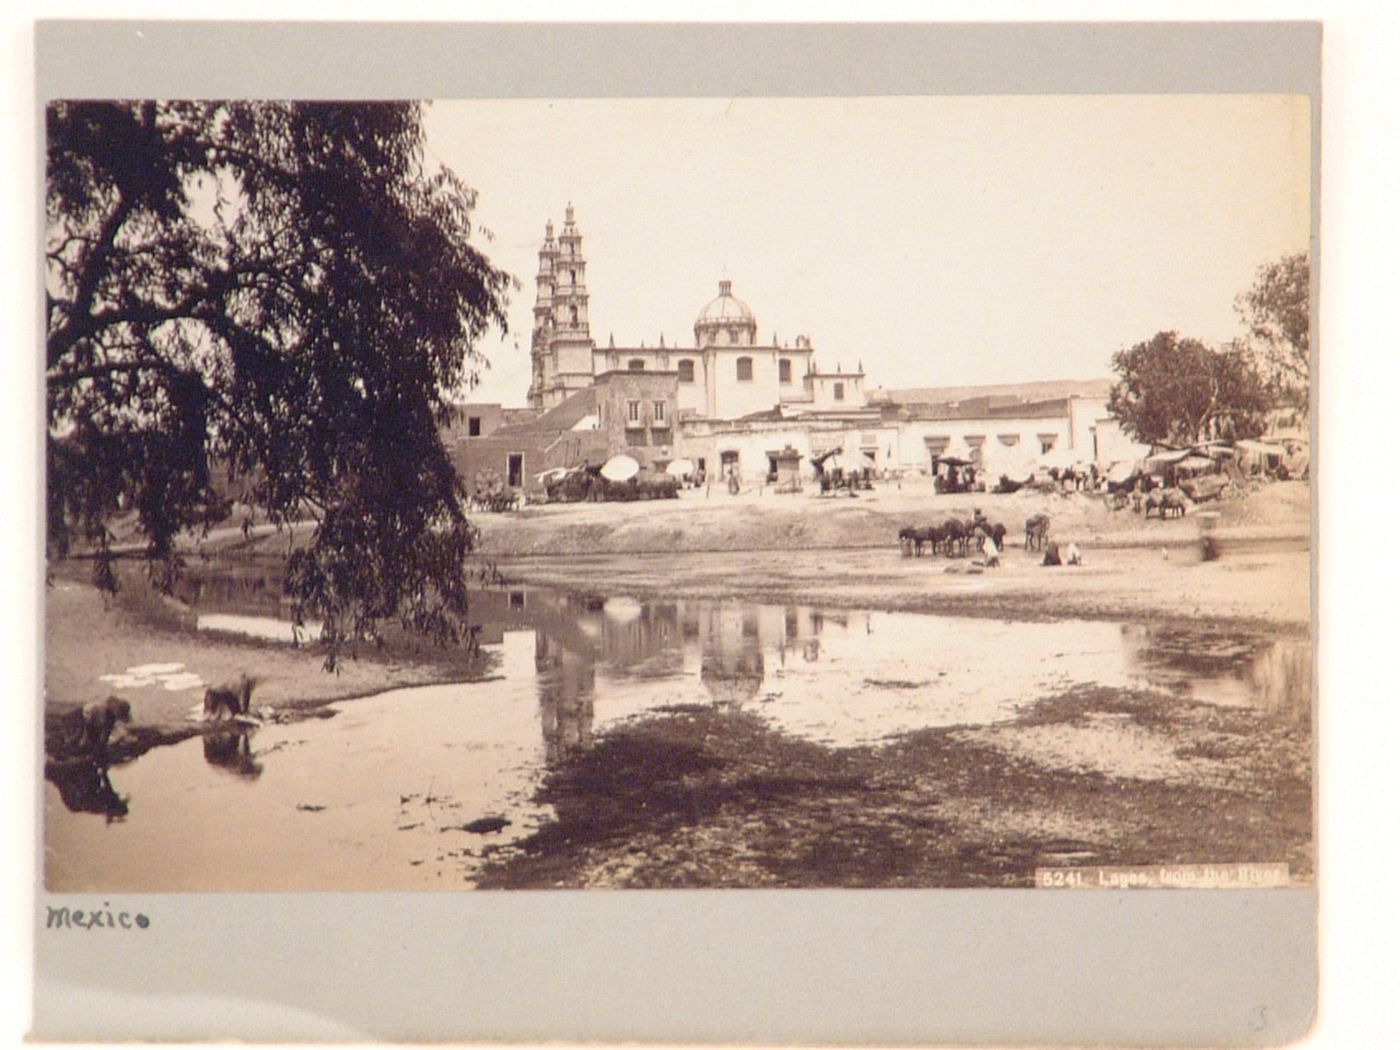 View of a marketplace from across a river with the Cathedral in the background, Lagos de Moreno, Mexico